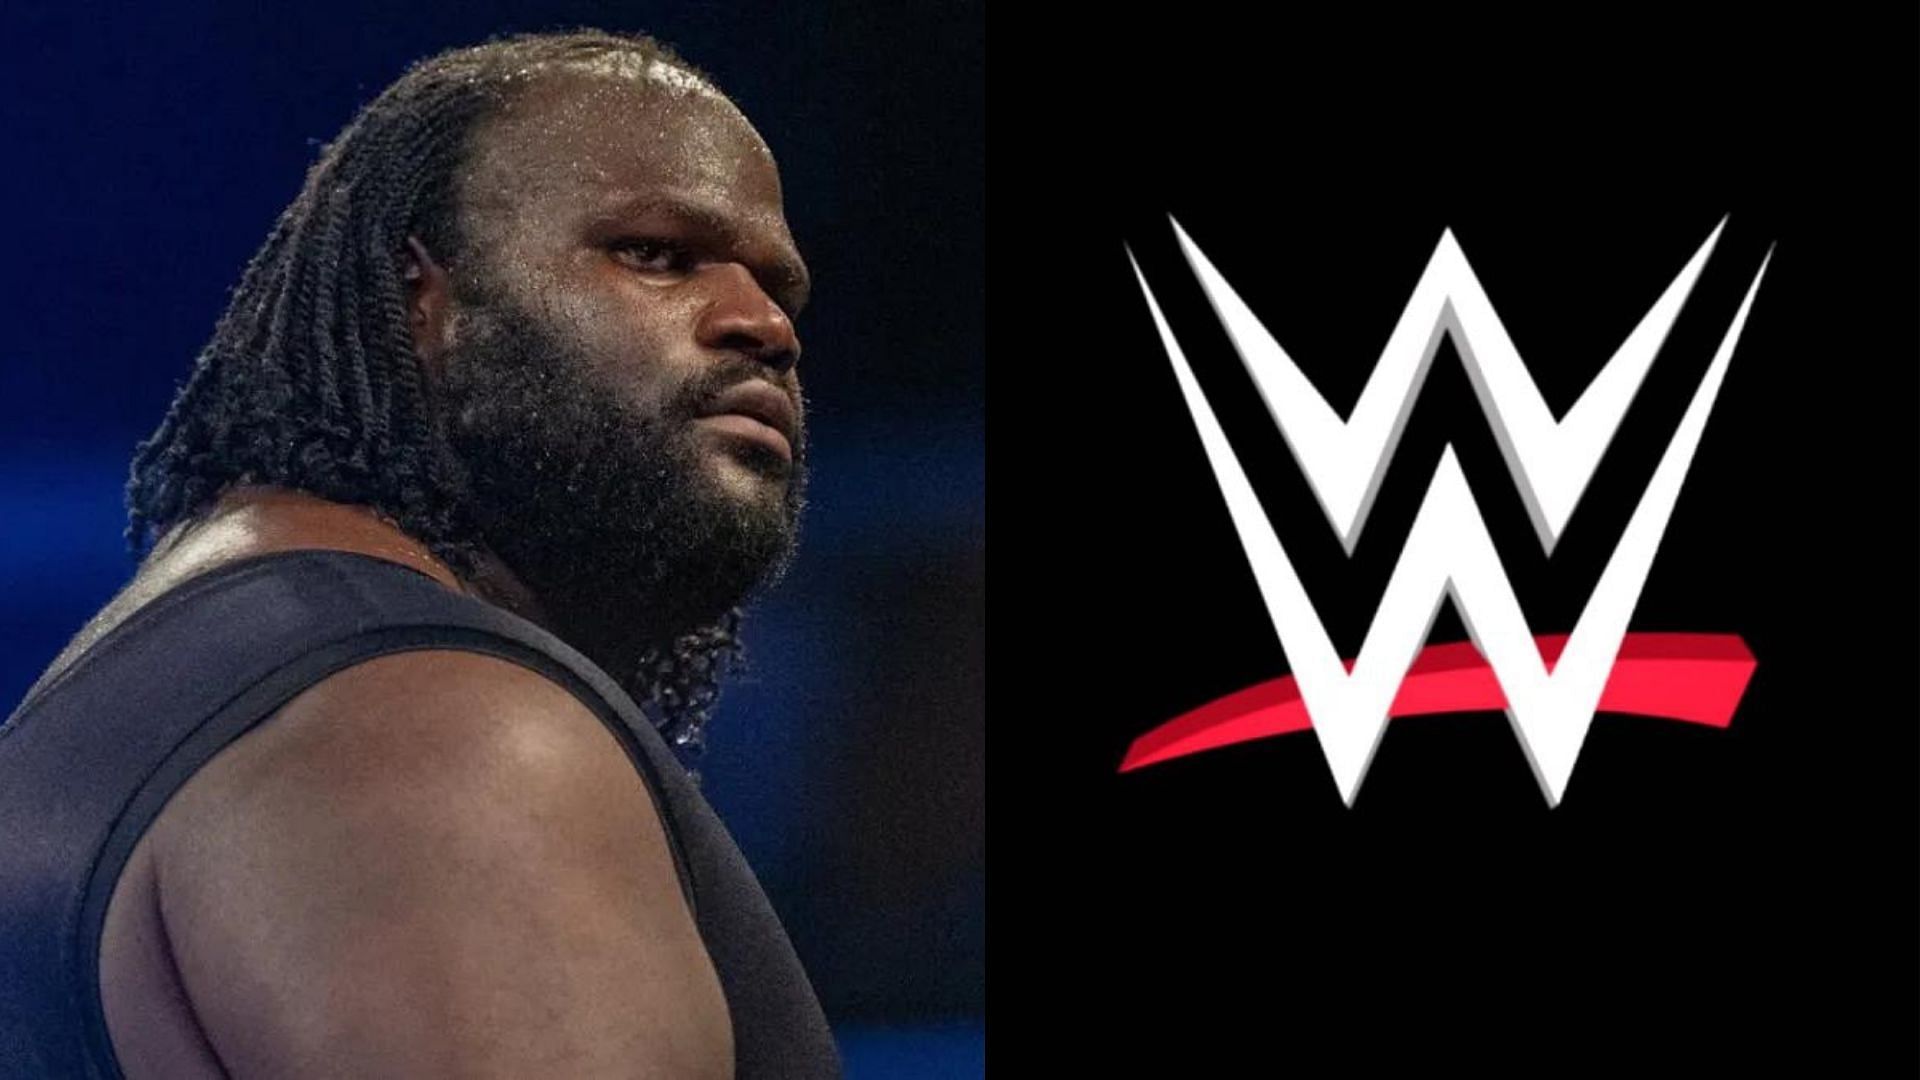 Mark Henry is the former WWE World Heavyweight Champion